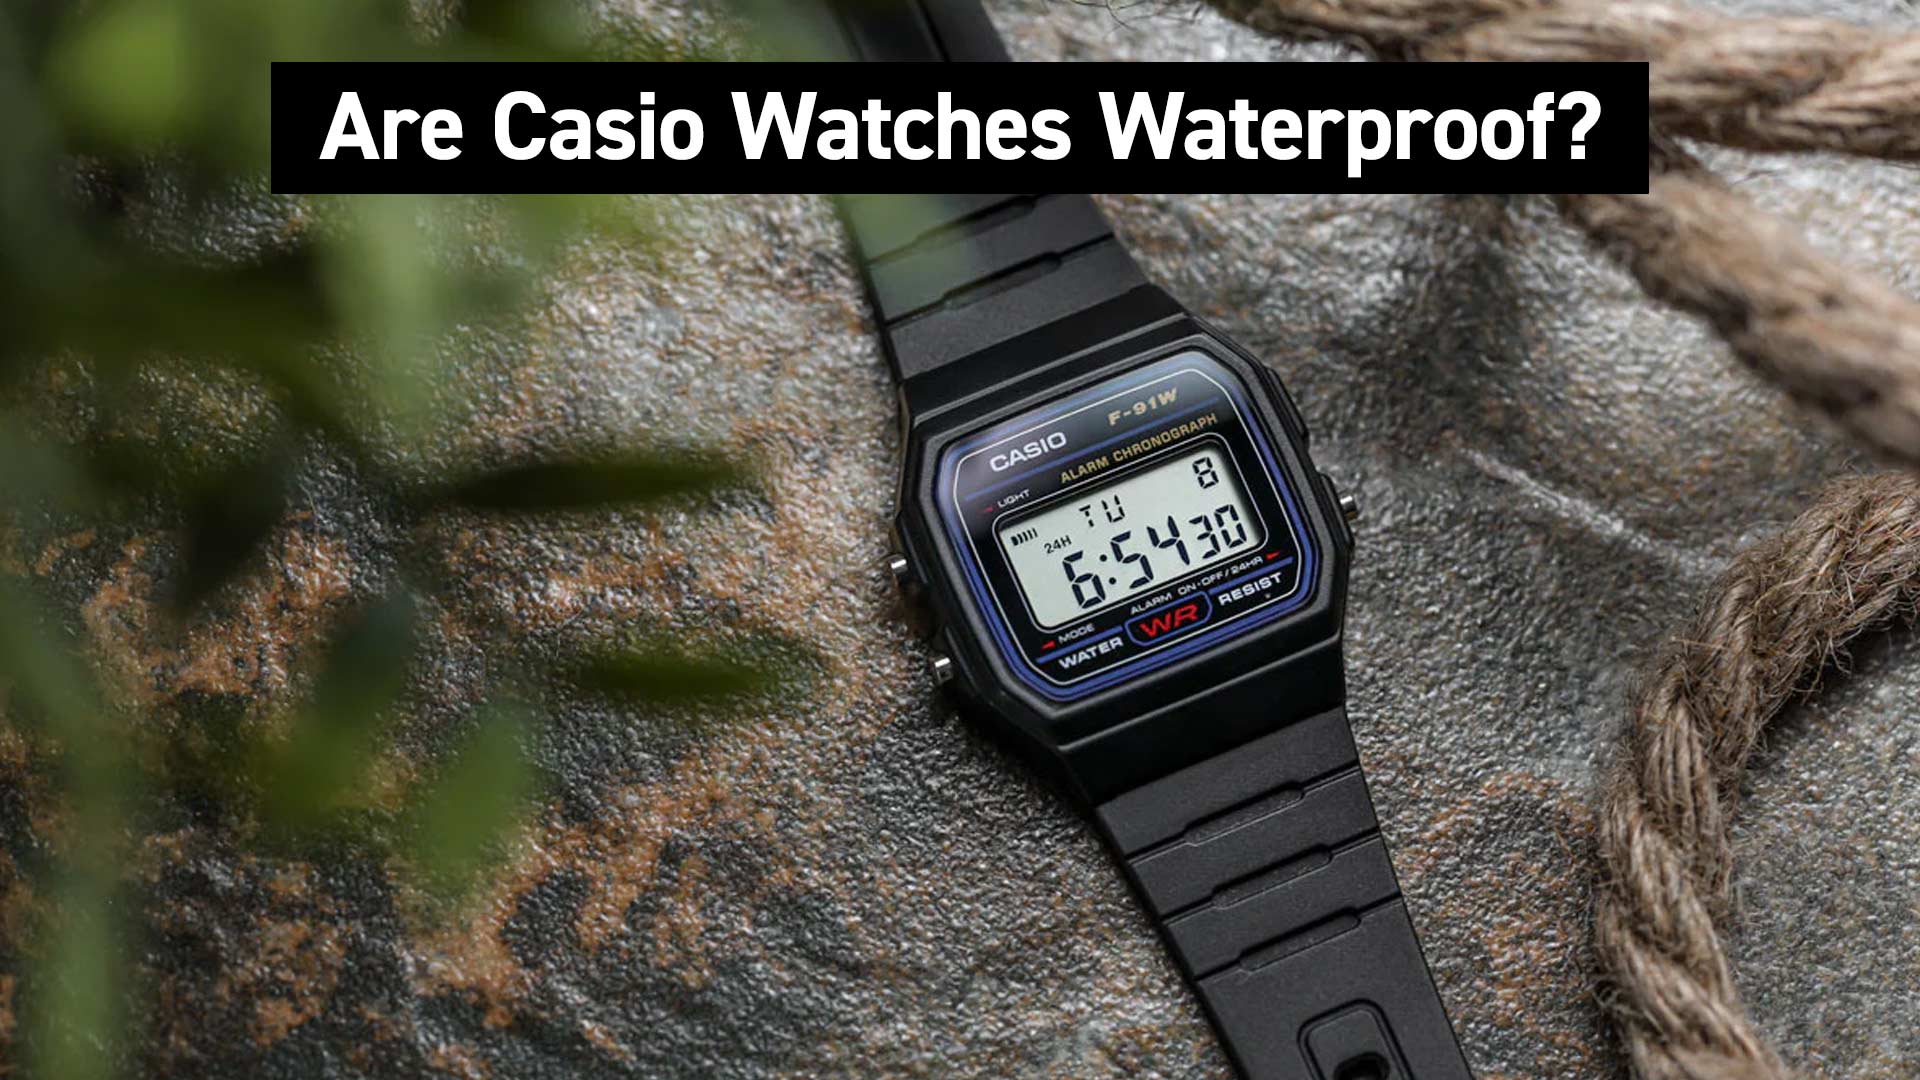 Are Casio Watches Waterproof?